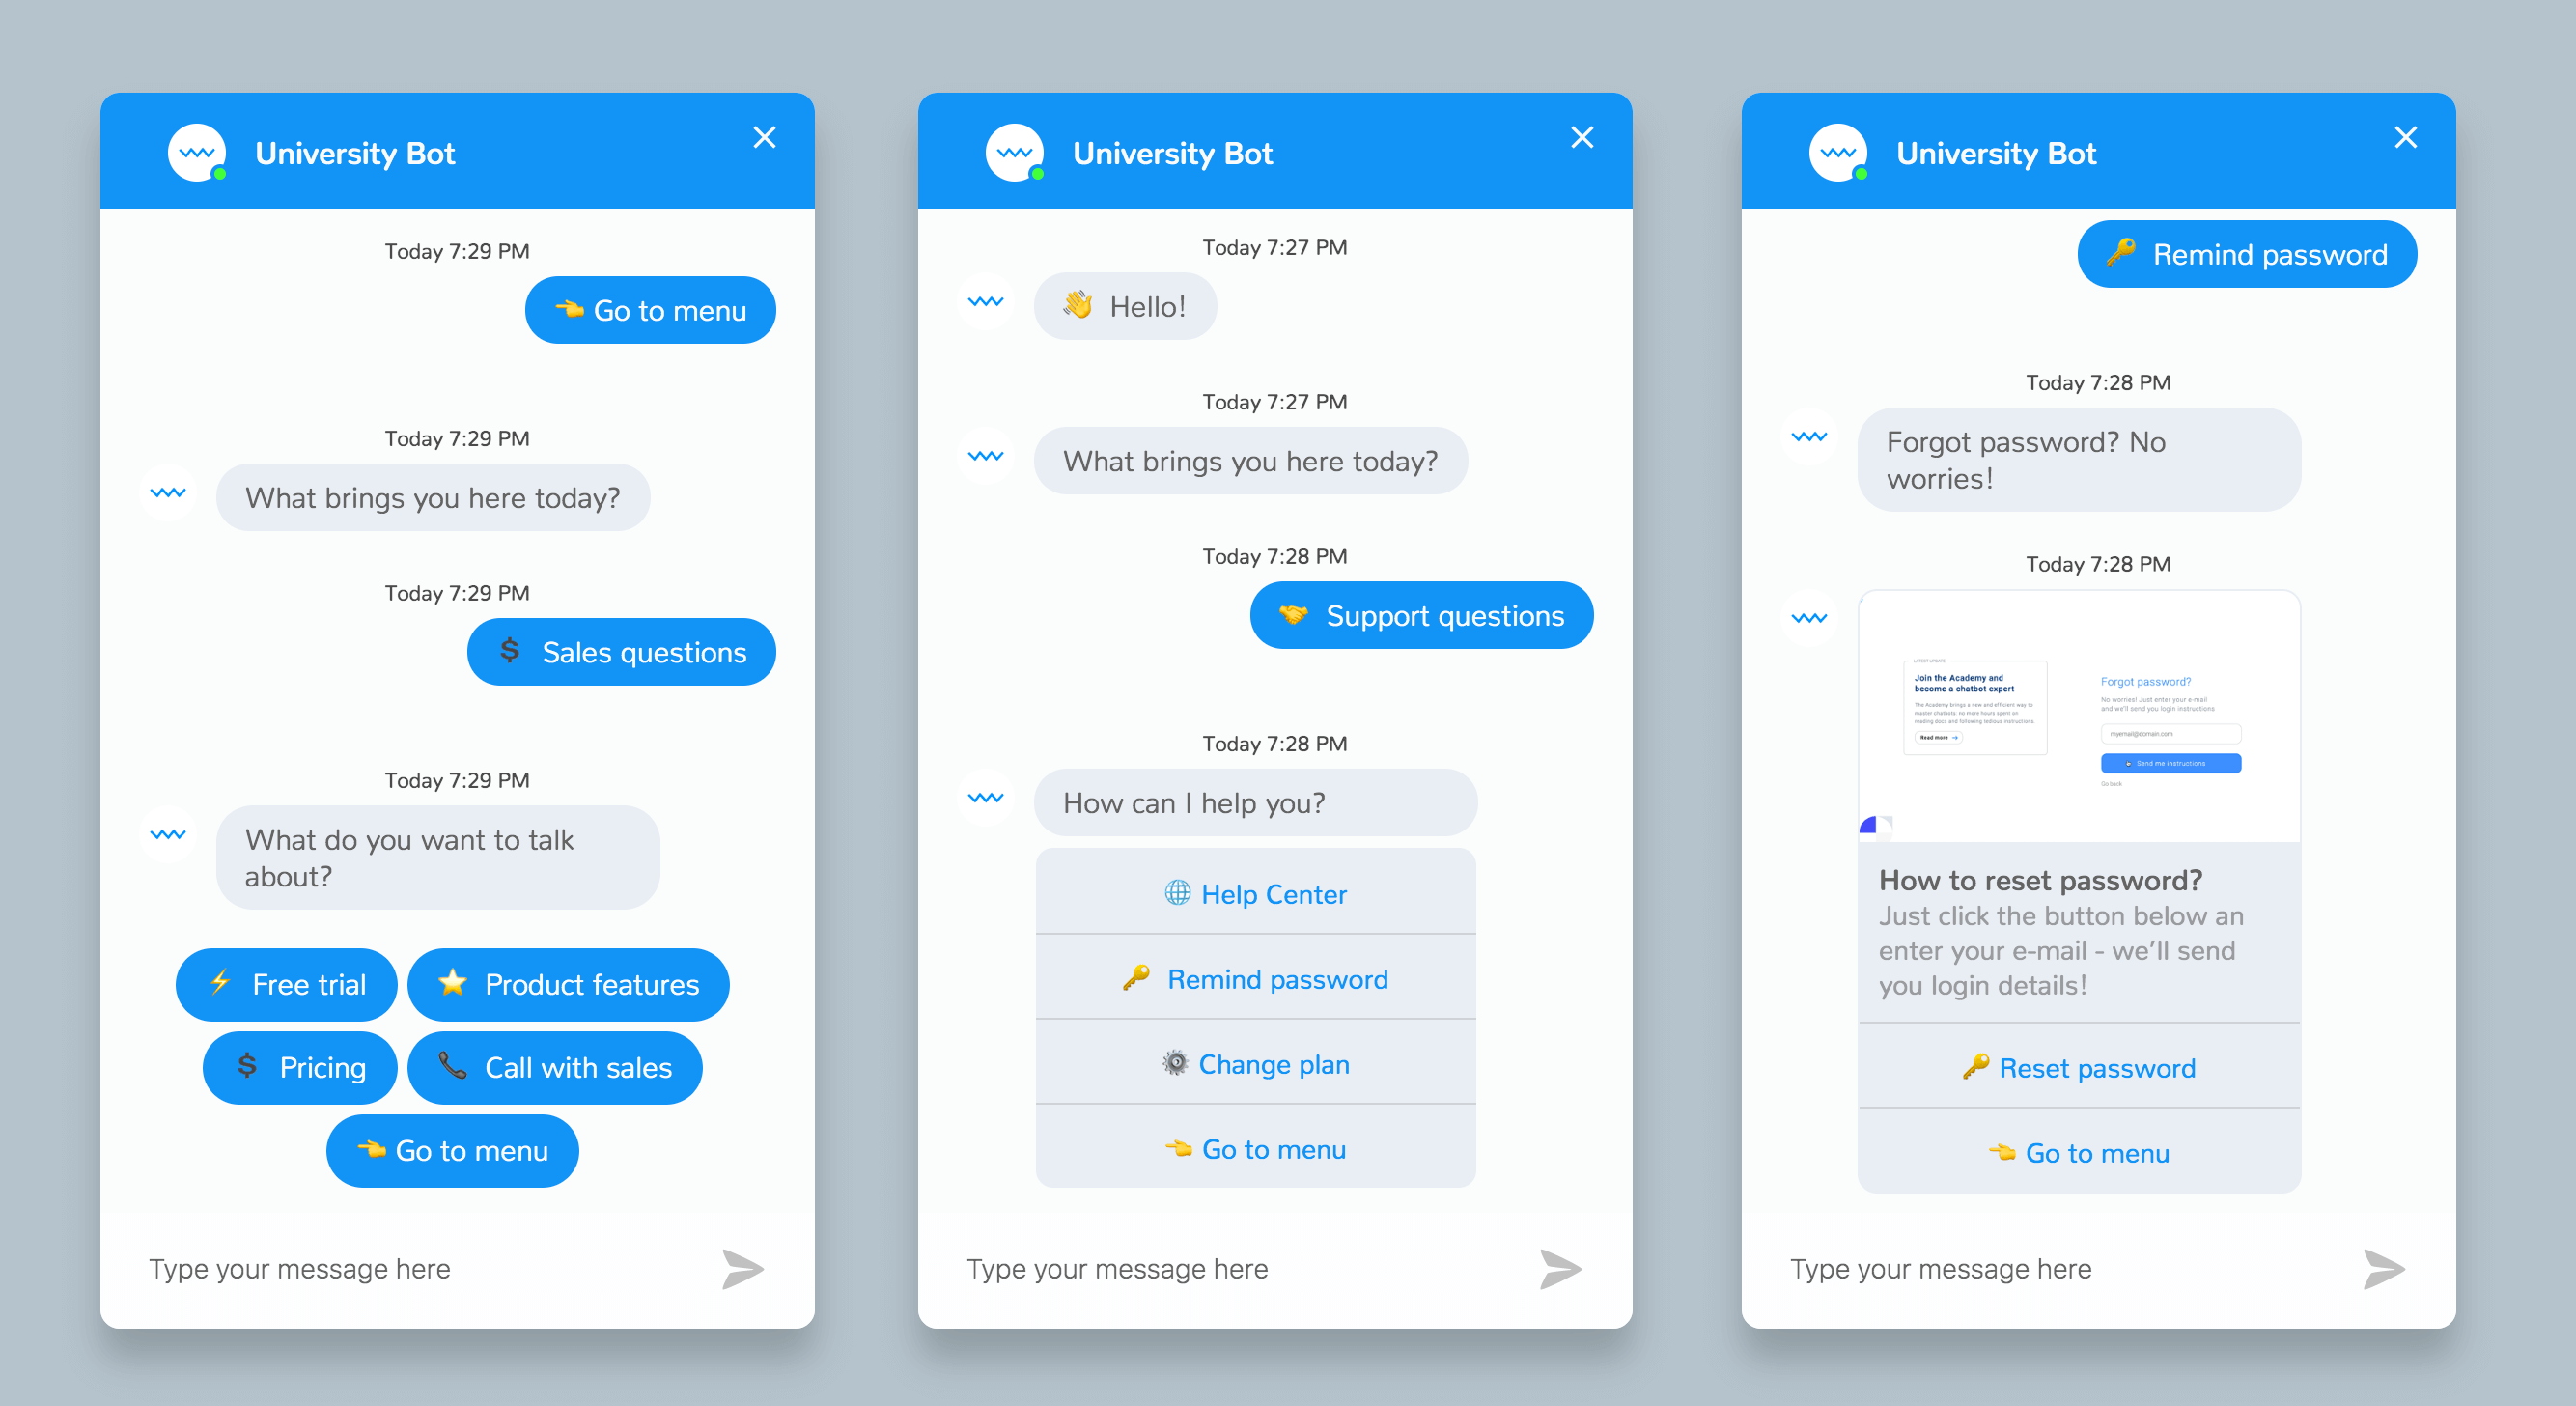 Customer Service chatbot that helps with sales and support queries